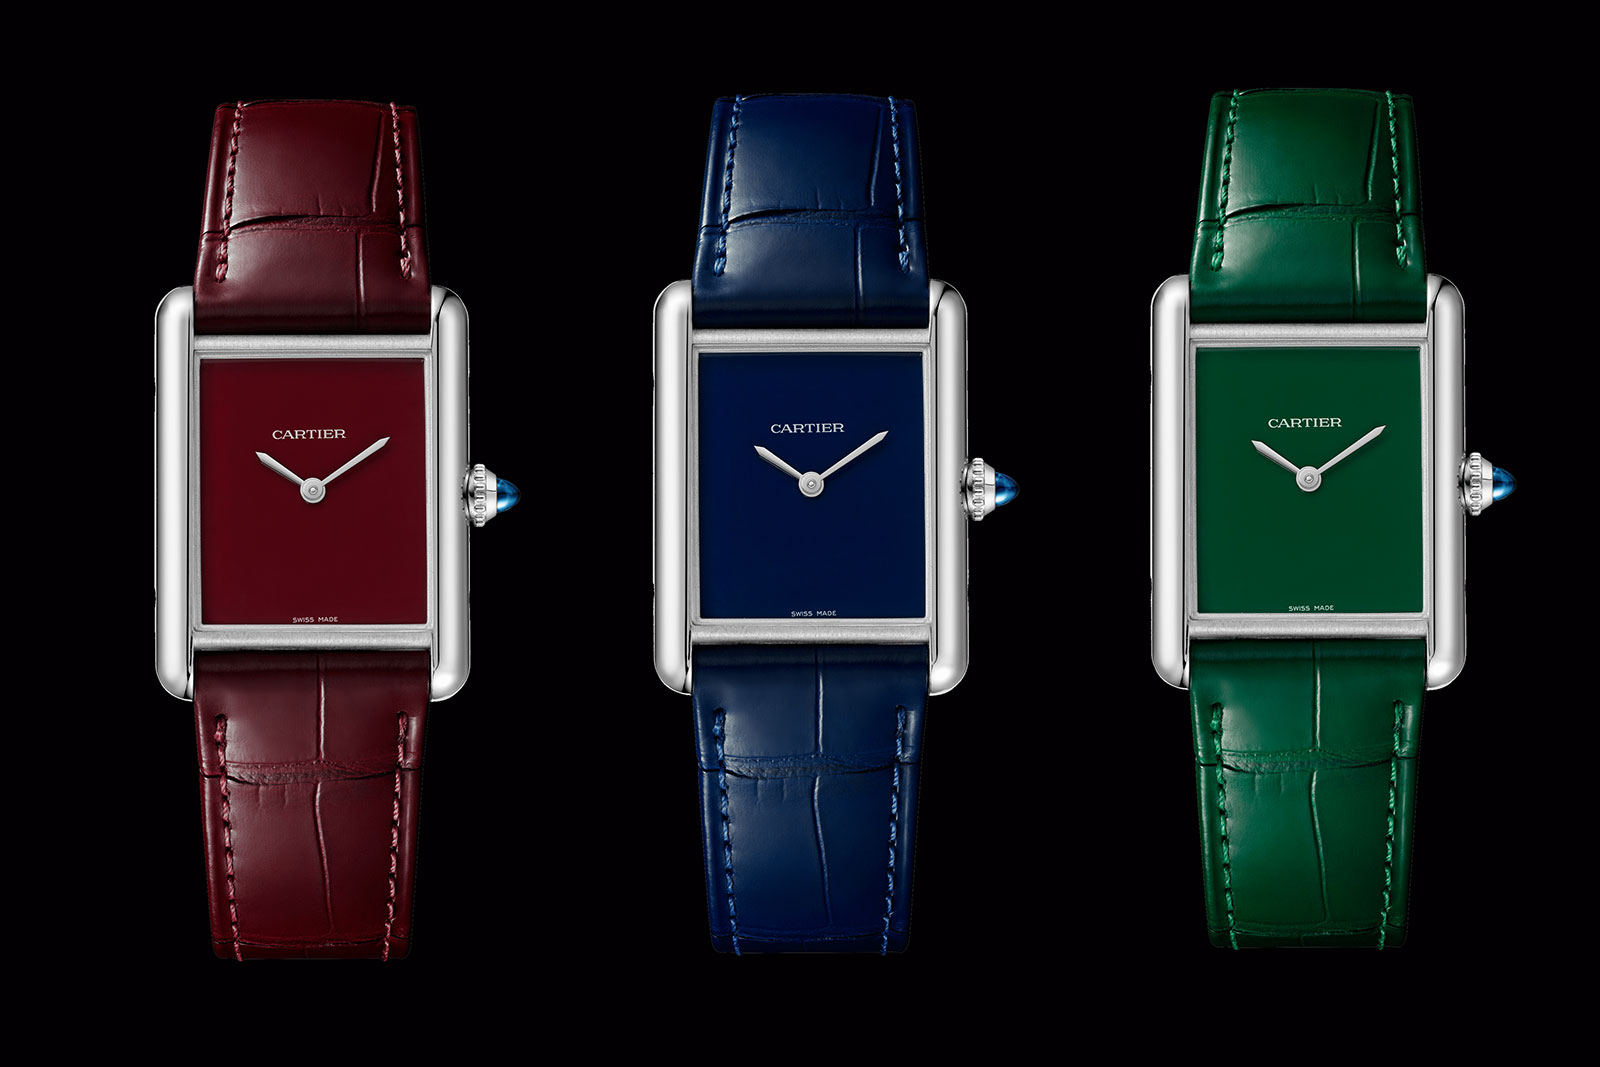 The Must returns in 2021 - The Cartier Tank Must Steel Collection